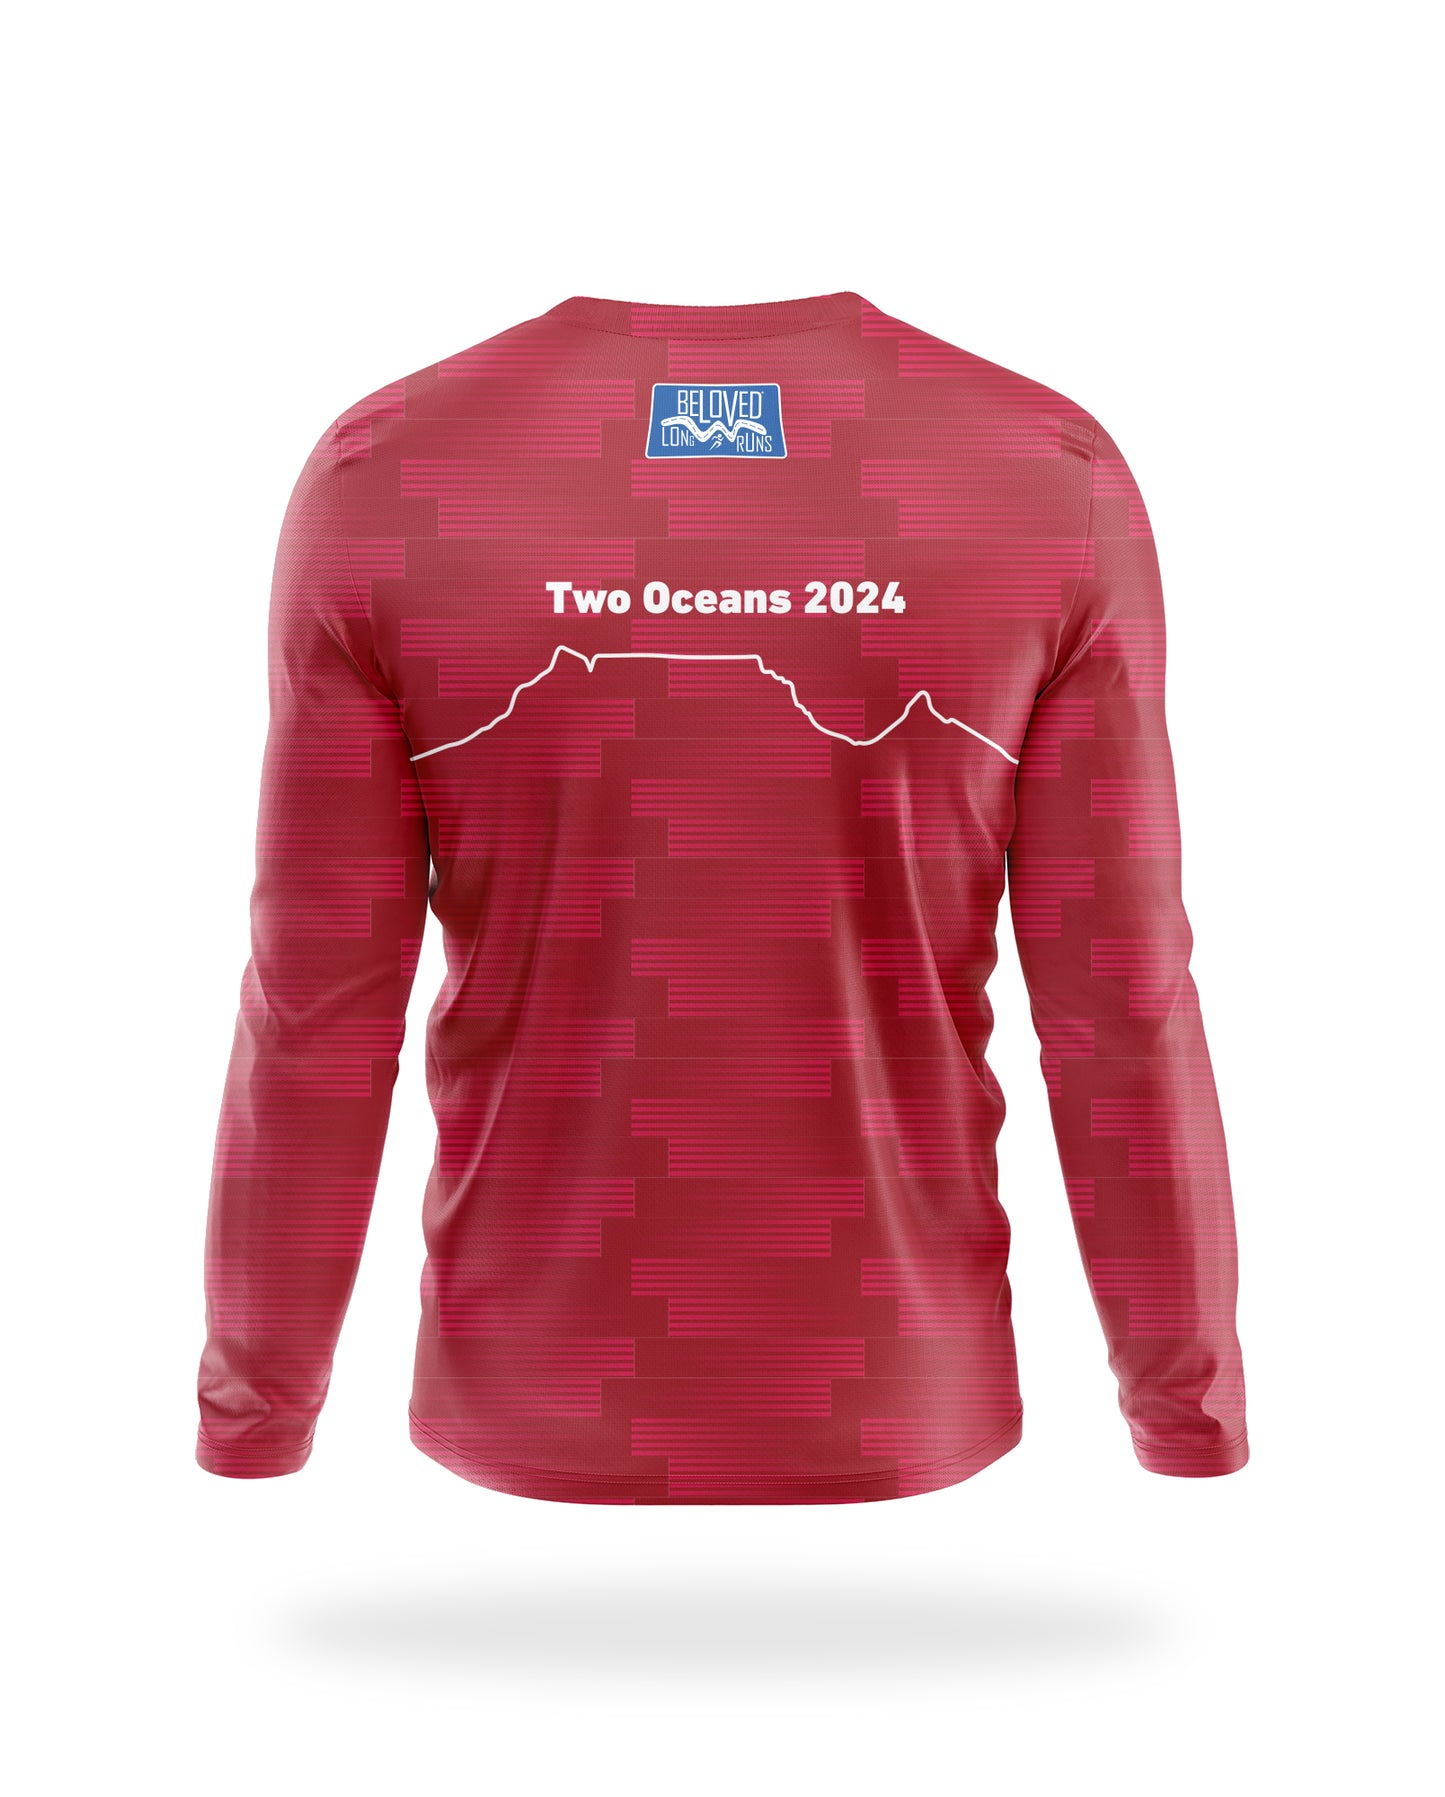 Women's BLR Two Oceans LS Tee - ARRIVING IN TIME FOR TWO OCEANS - PRE ORDER NOW